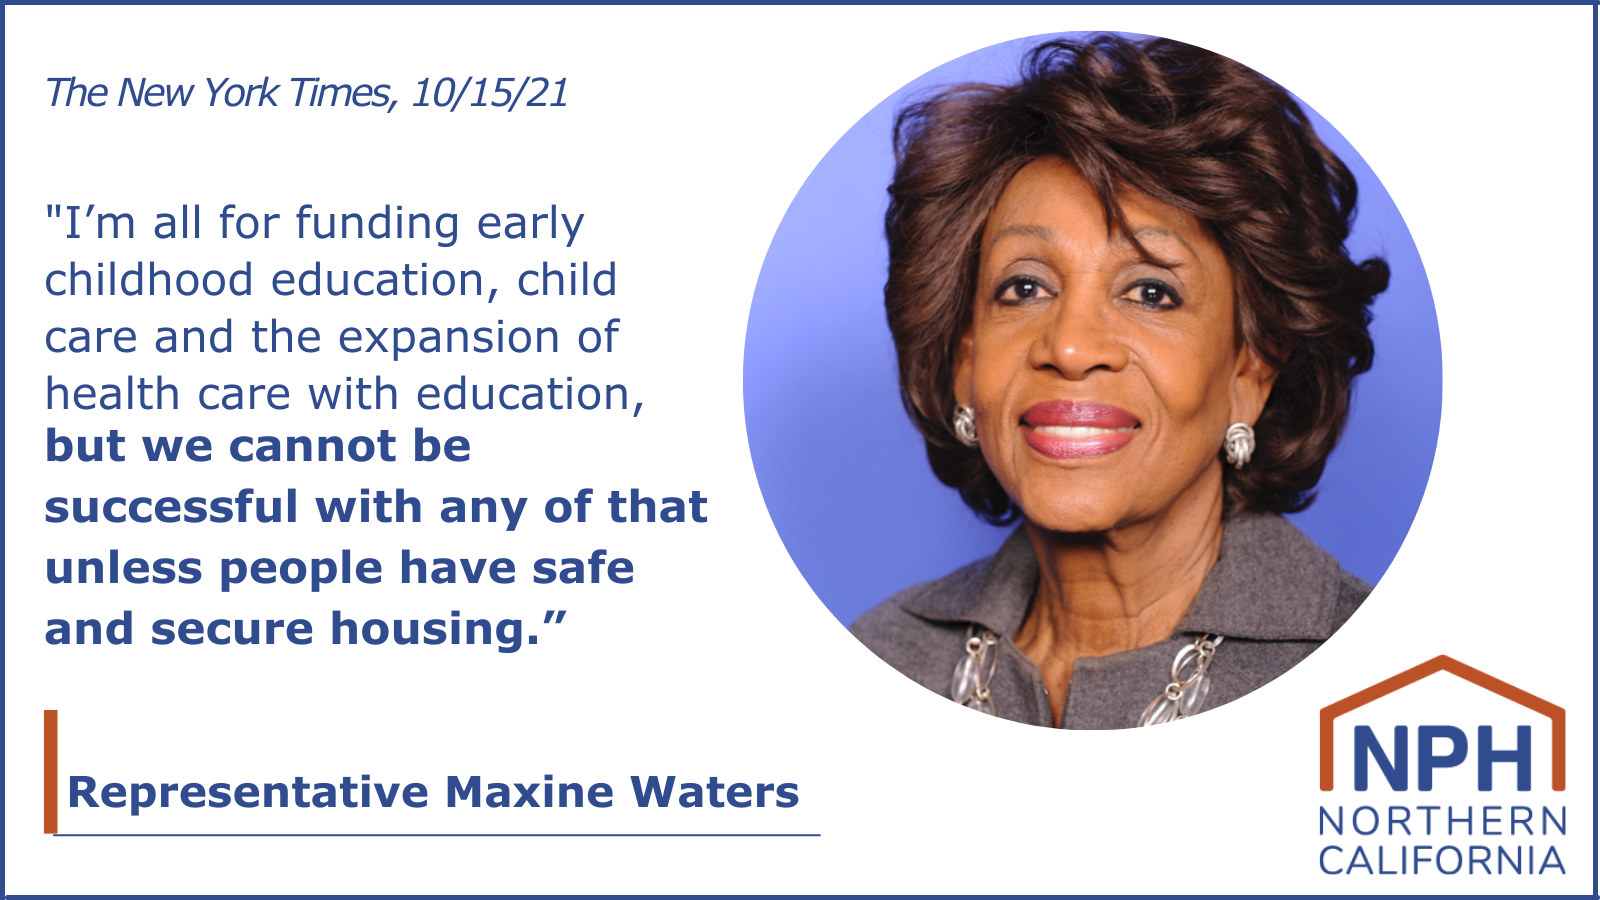 Maxine Waters with her quote